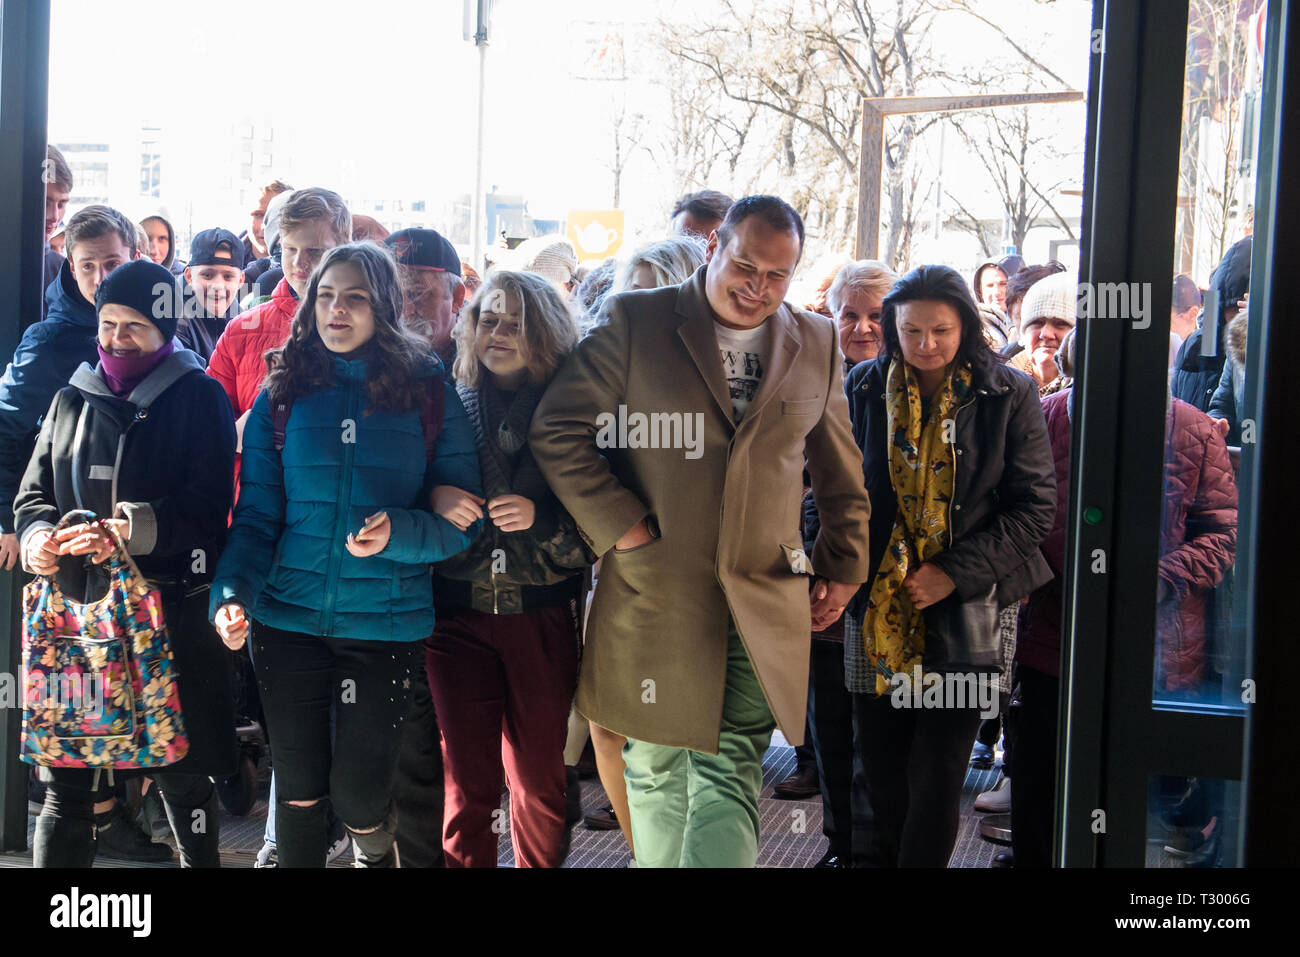 04.04.2019. RIGA, LATVIA. Crowd with people in Akropole shopping centre. Official opening of biggest shopping centre Akropole in Latvia. The shopping  Stock Photo